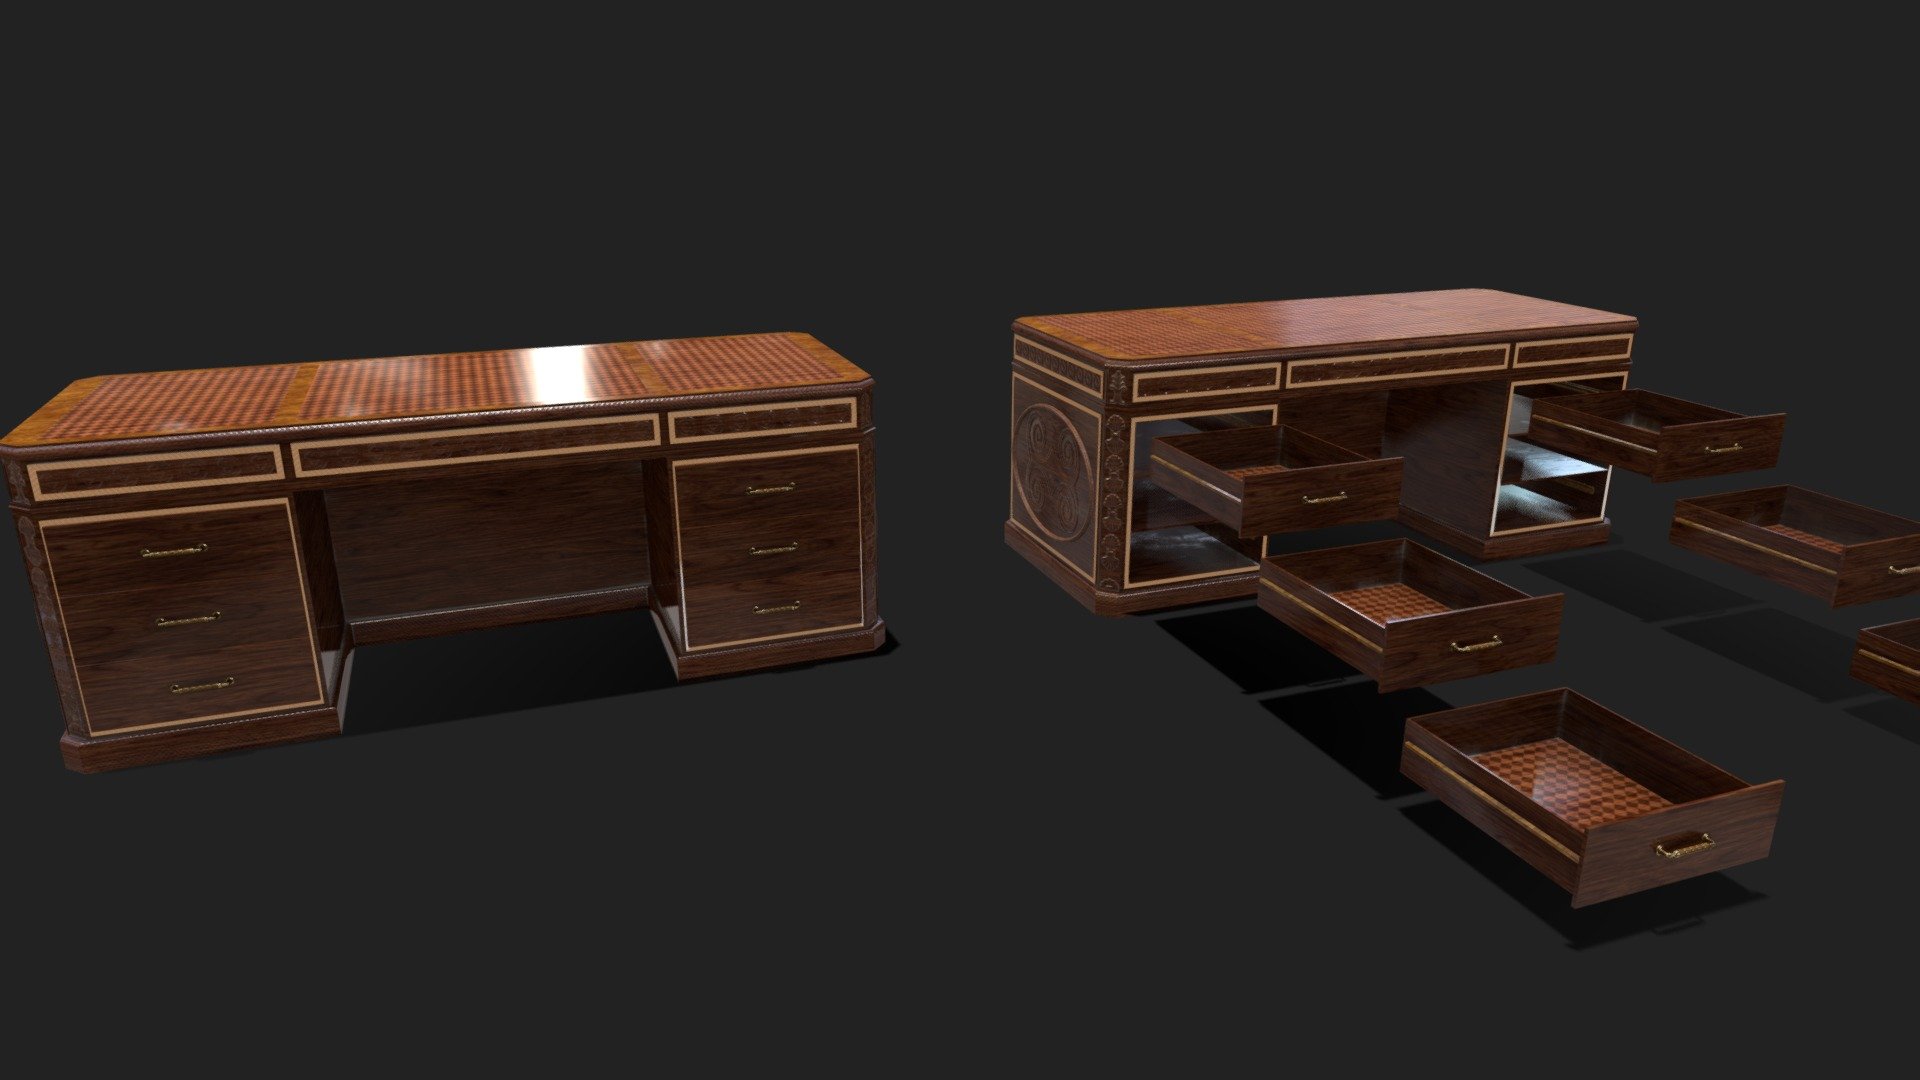 An luxury office desk. The drawers are separated from the desk and openable. It has 2 materials.

2048x2048 textures packs (PBR Metal Rough, Unity HDRP, Unity Standard Metallic and UE4):

PBR Metal Rough- BaseColor, AO, Height, Normal, Roughness and Metallic;

Unity HDRP: BaseColor, MaskMap, Normal;

Unity Standard Metallic: AlbedoTransparency, MetallicSmoothness, Normal;

Unreal Engine 4: BaseColor, Normal, OcclusionRoughnessMetallic;

The package also has the .fbx, .obj, .stl, .dae and .blend file 3d model